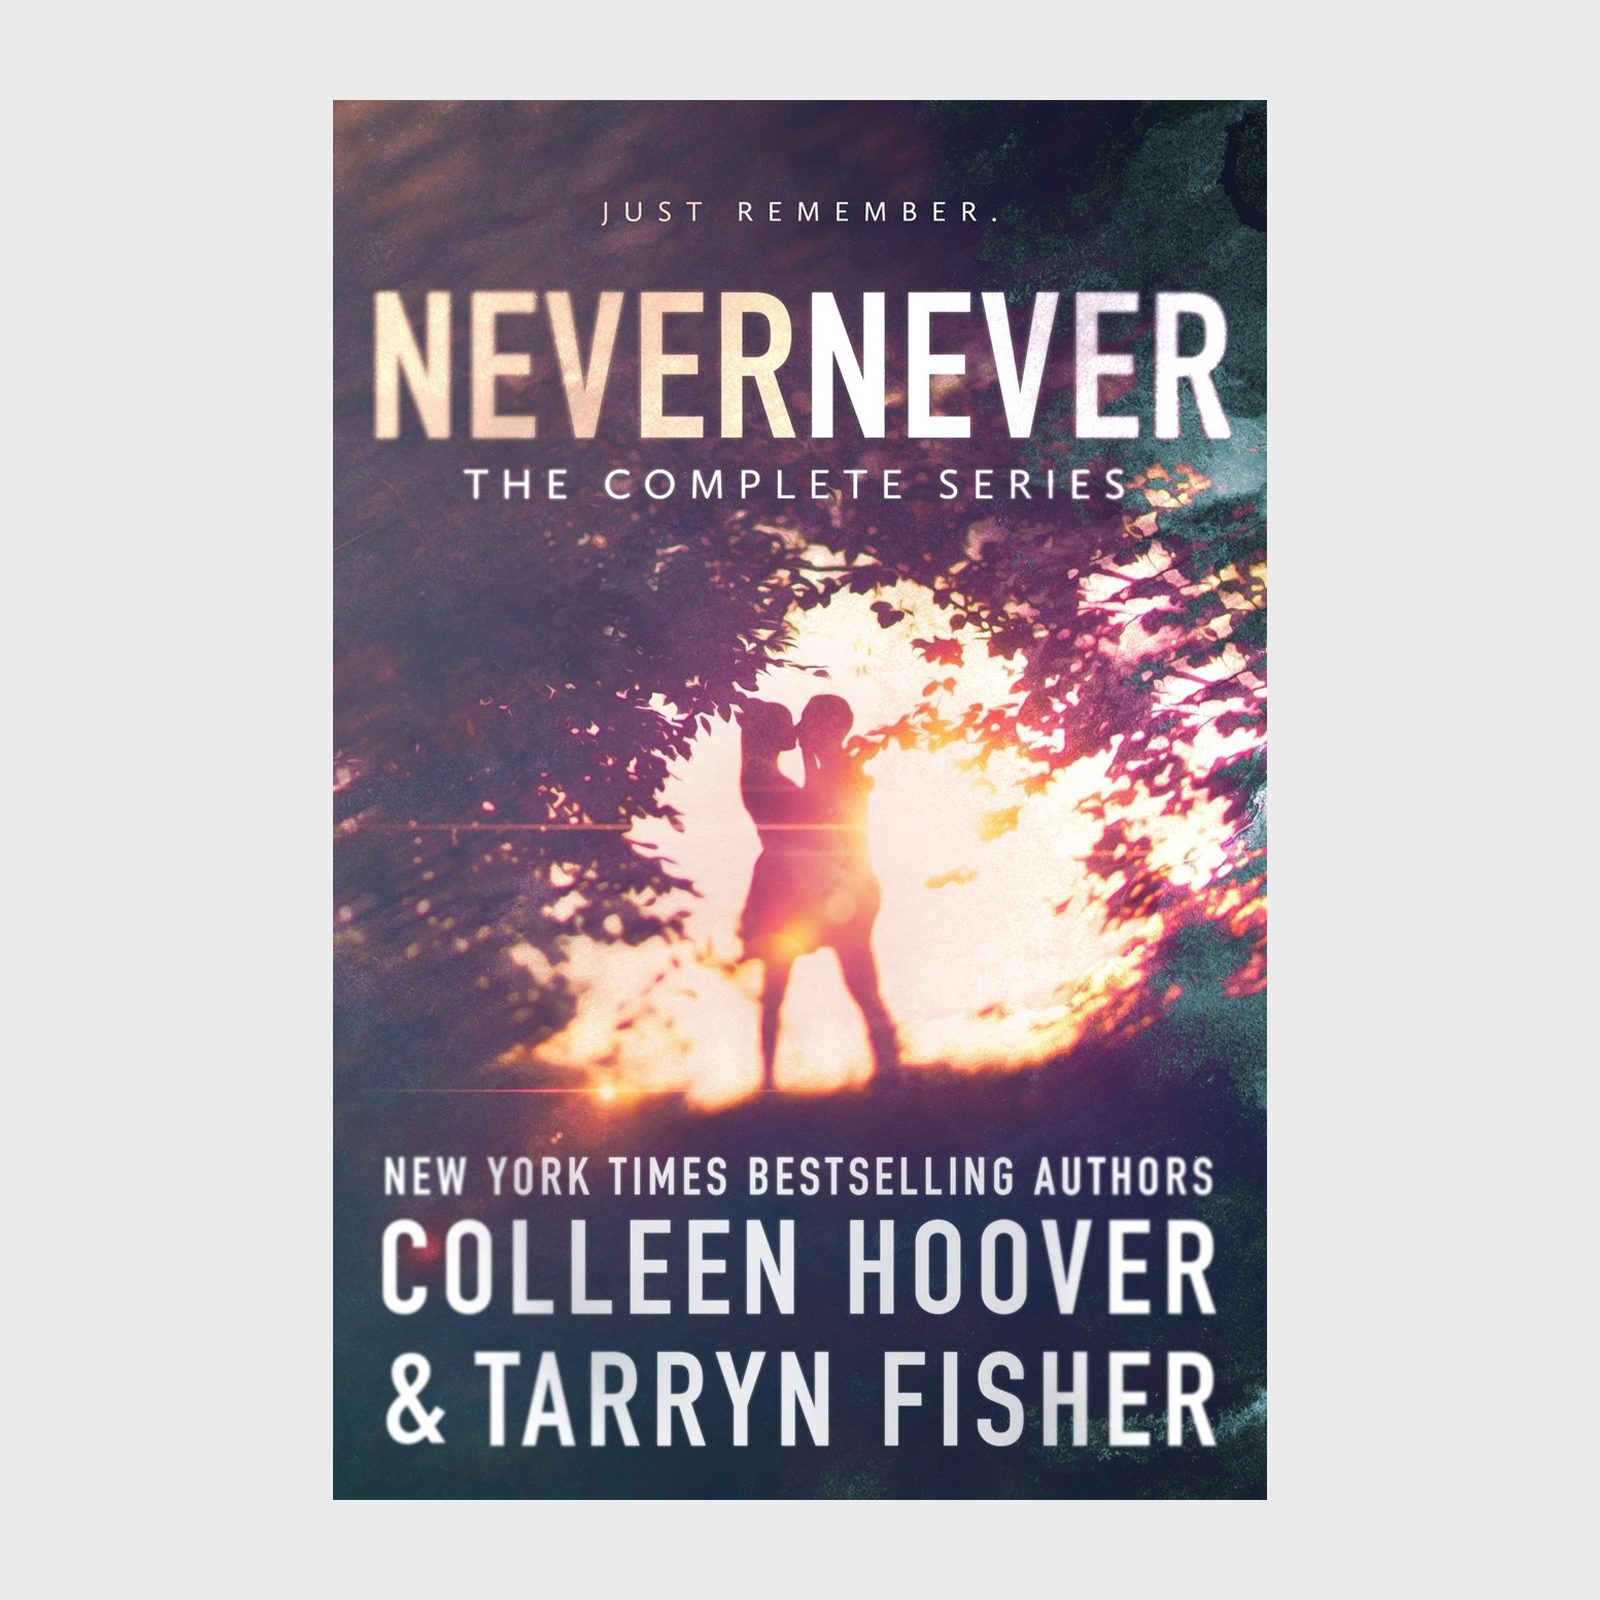 Texas Author Colleen Hoover's Viral Book Is Getting A Movie